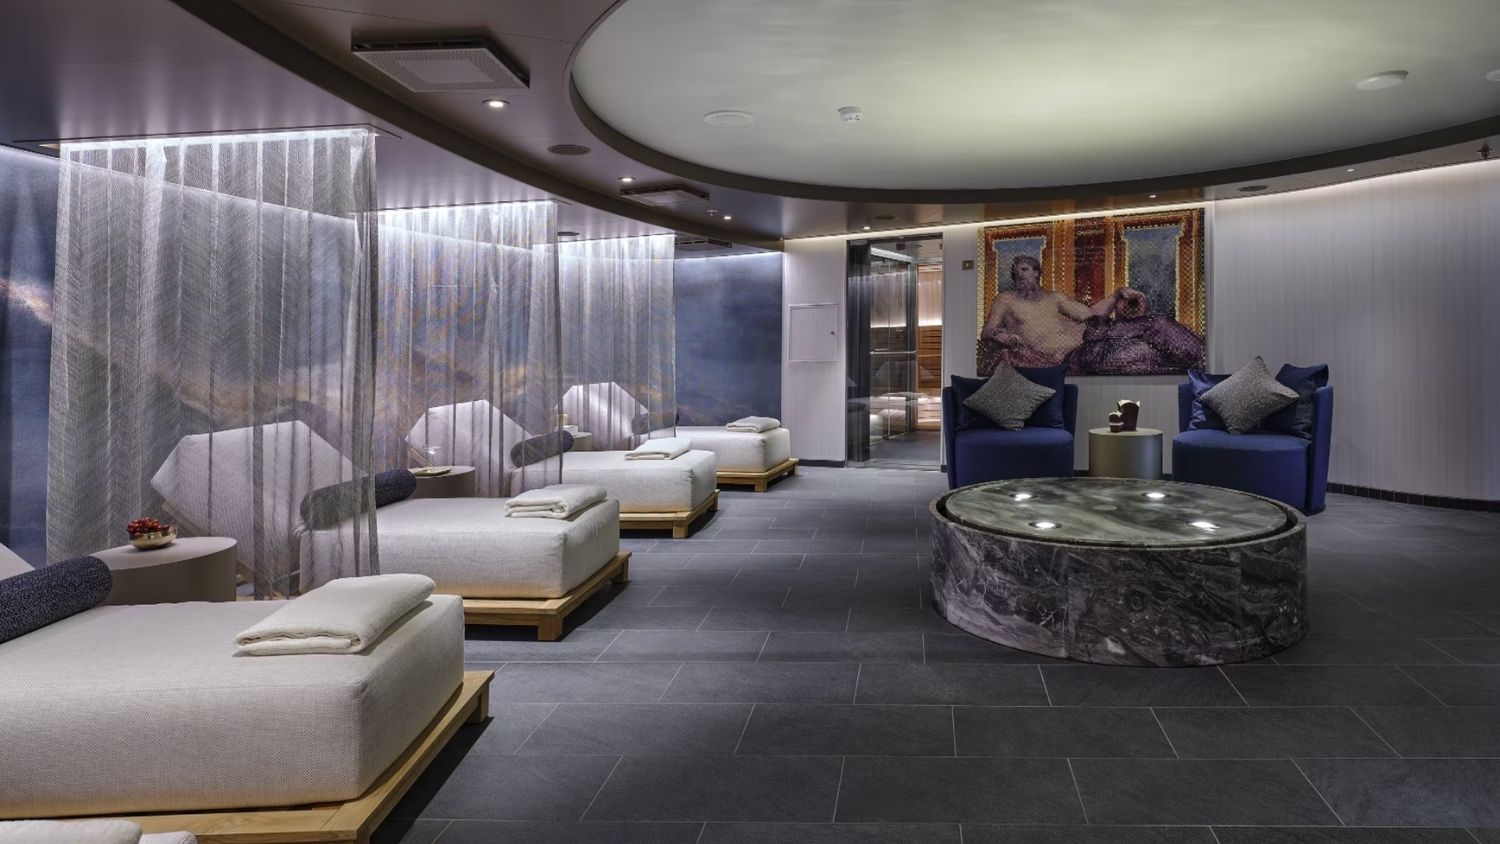  has unveiled details of its new Otium wellness program, as well as the new ship’s reimagined spa